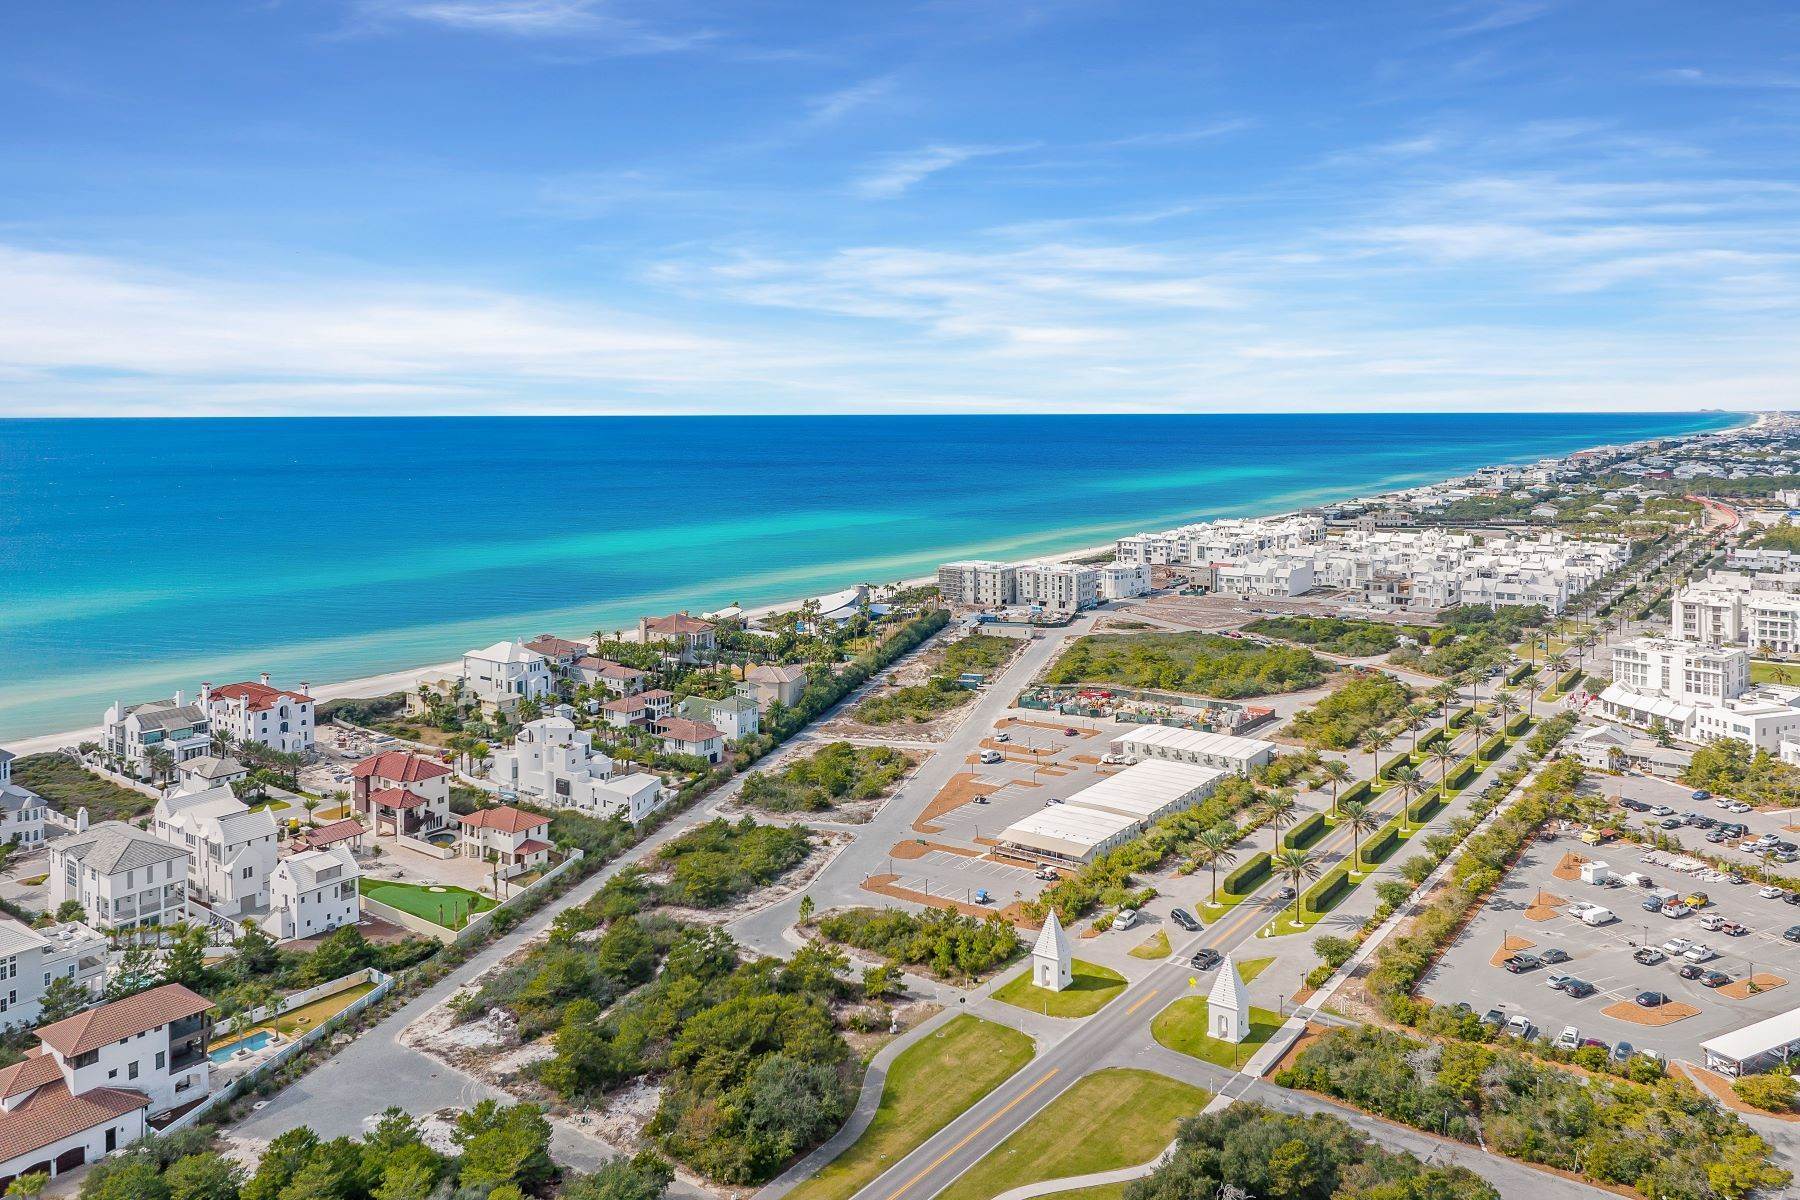 Land for Sale at Gulf View Alys Beach Lot with Approved Architectural Plans UU8 Elbow Beach Road Alys Beach, Florida 32461 United States